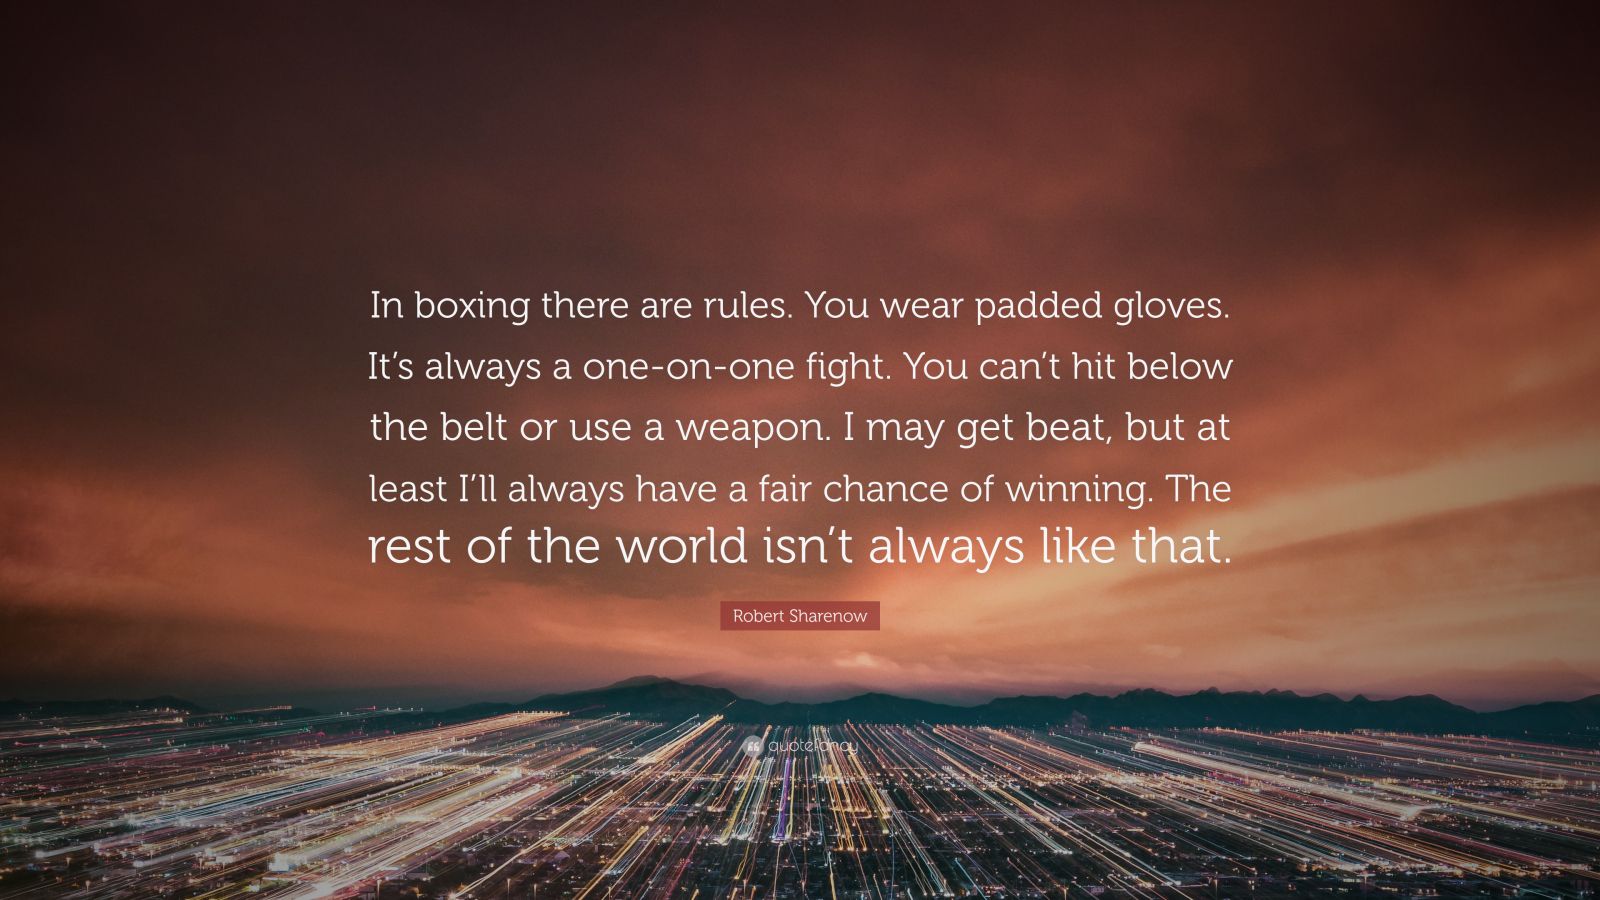 Robert Sharenow Quote: “In boxing there are rules. You wear padded gloves.  It's always a one-on-one fight. You can't hit below the belt or use a”